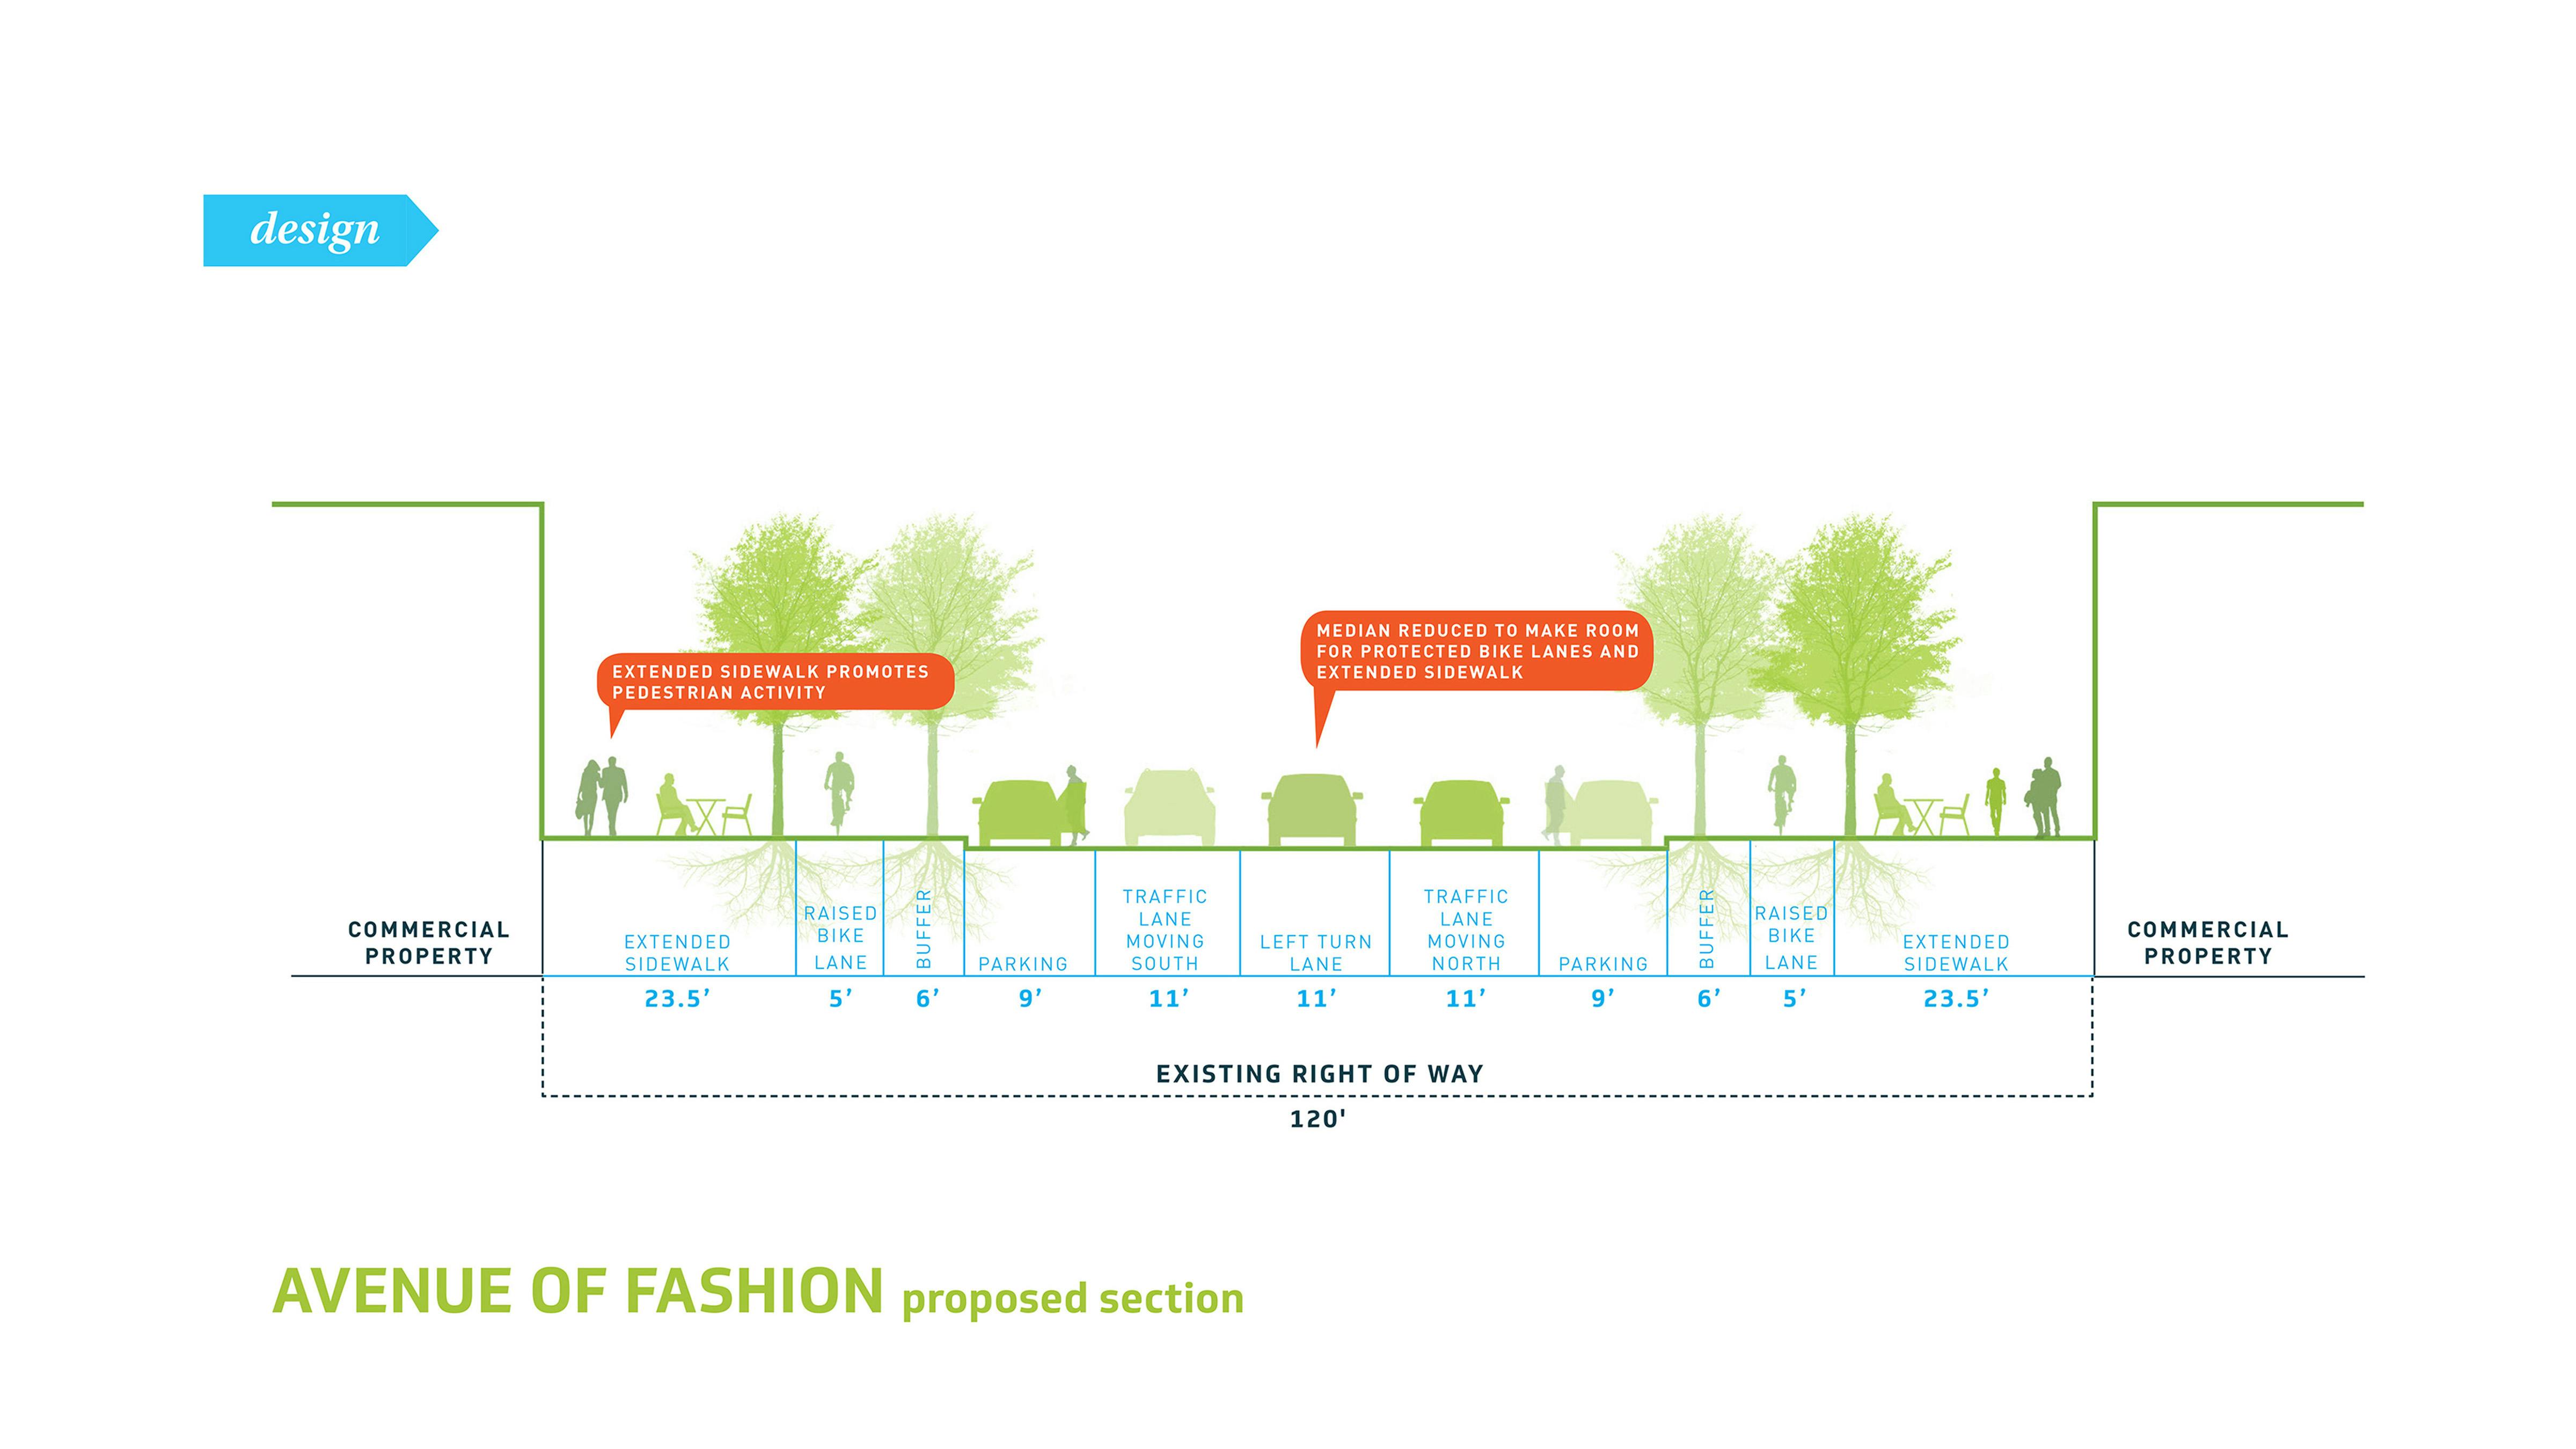 Section drawing of proposed design typical condition at Avenue of Fashion, illustrating removal of median to provide wider pedestrian right of way, reducing one drive lane and width of drive lane on both sides to provide bike lanes and planted buffers.